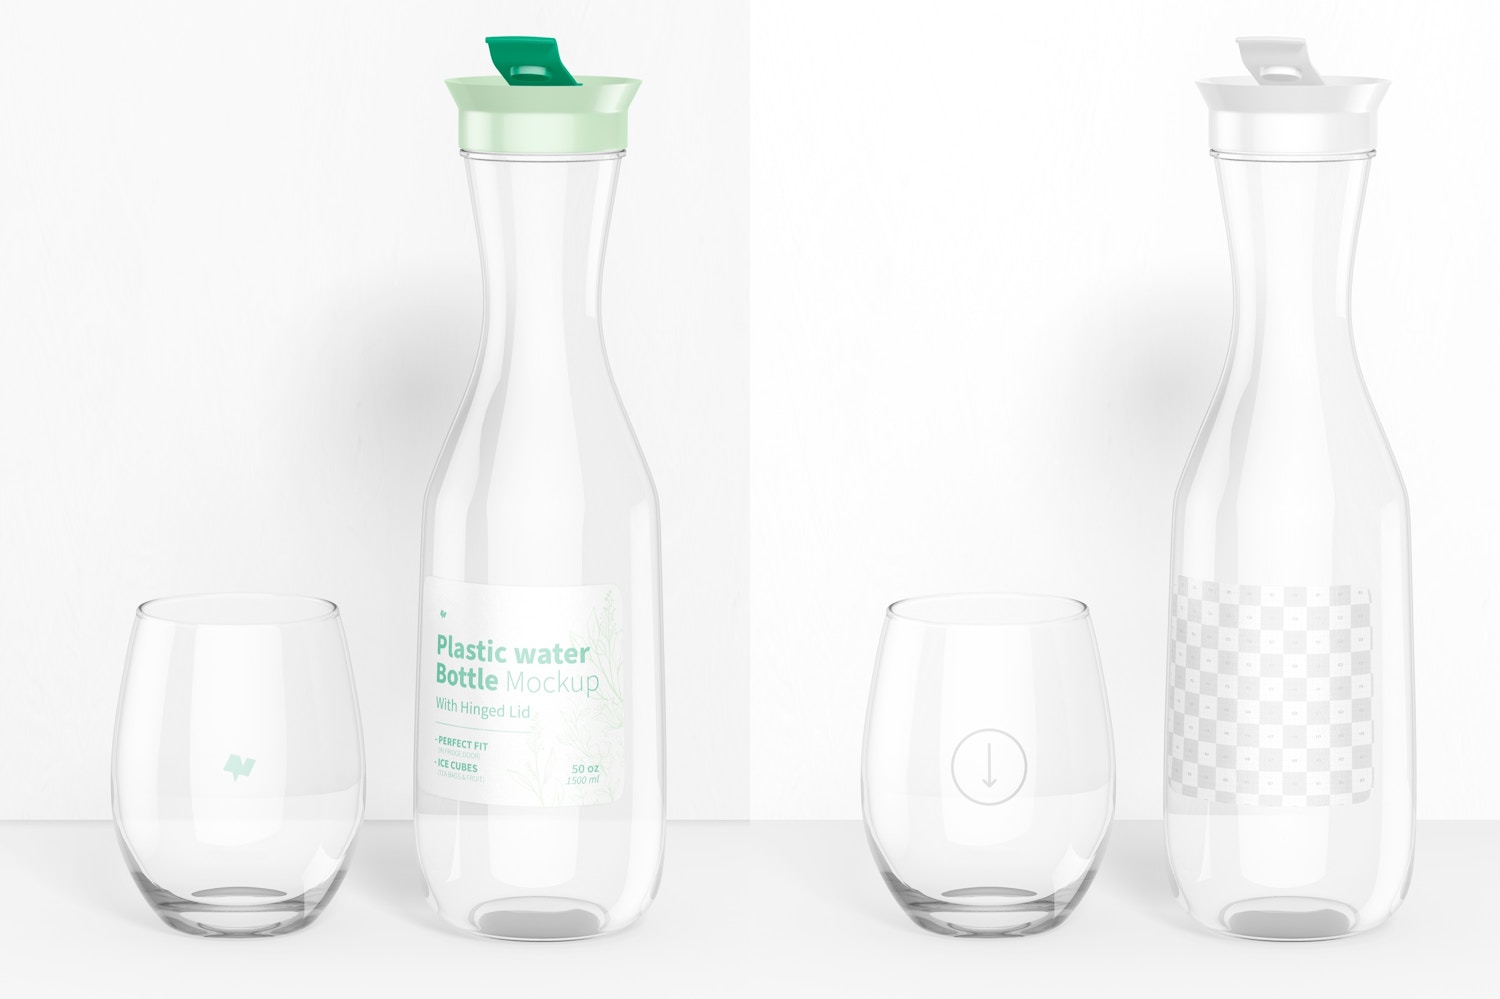 Plastic Water Bottle with Hinged Lid with Glass Mockup